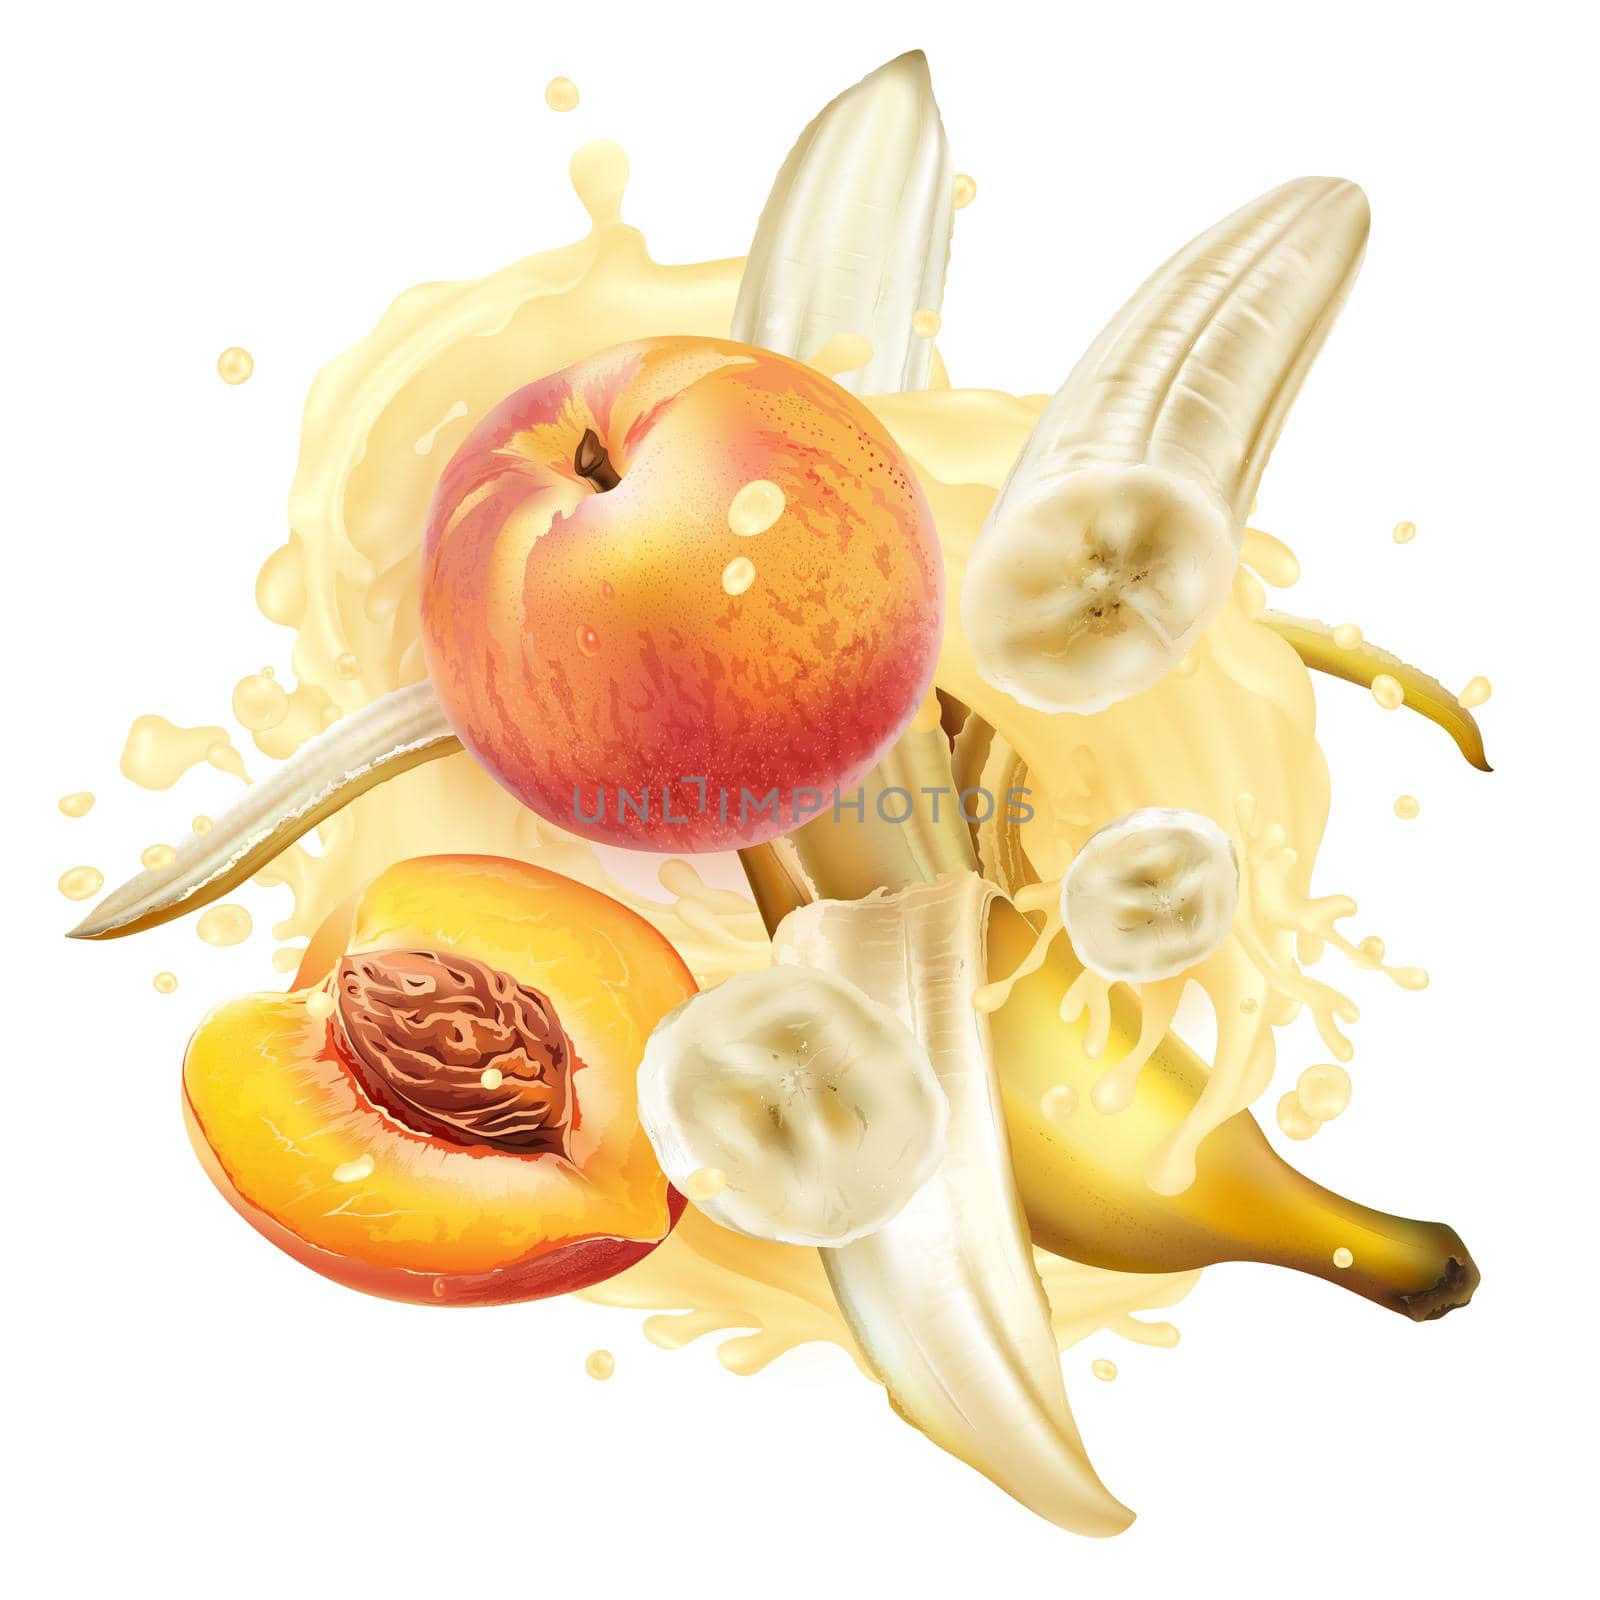 Bananas and peaches in a splash of milkshake or yogurt on a white background. Realistic style illustration.